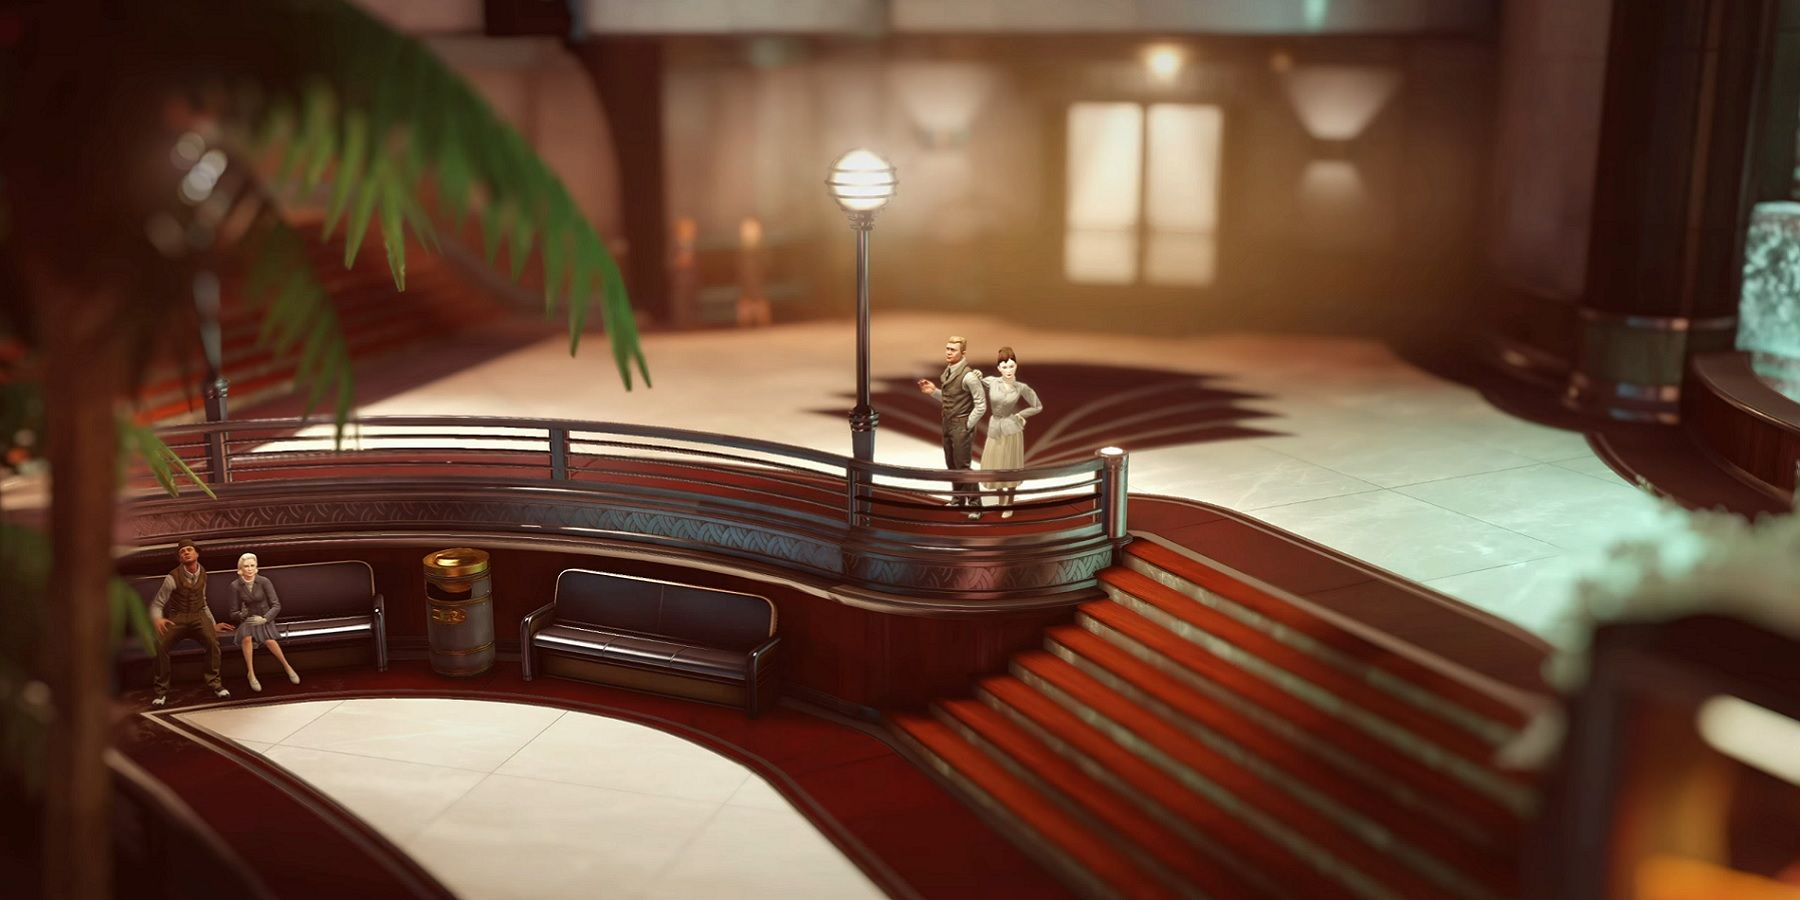 Image from BioShock showing Rapture as though it's a cute tiny model.